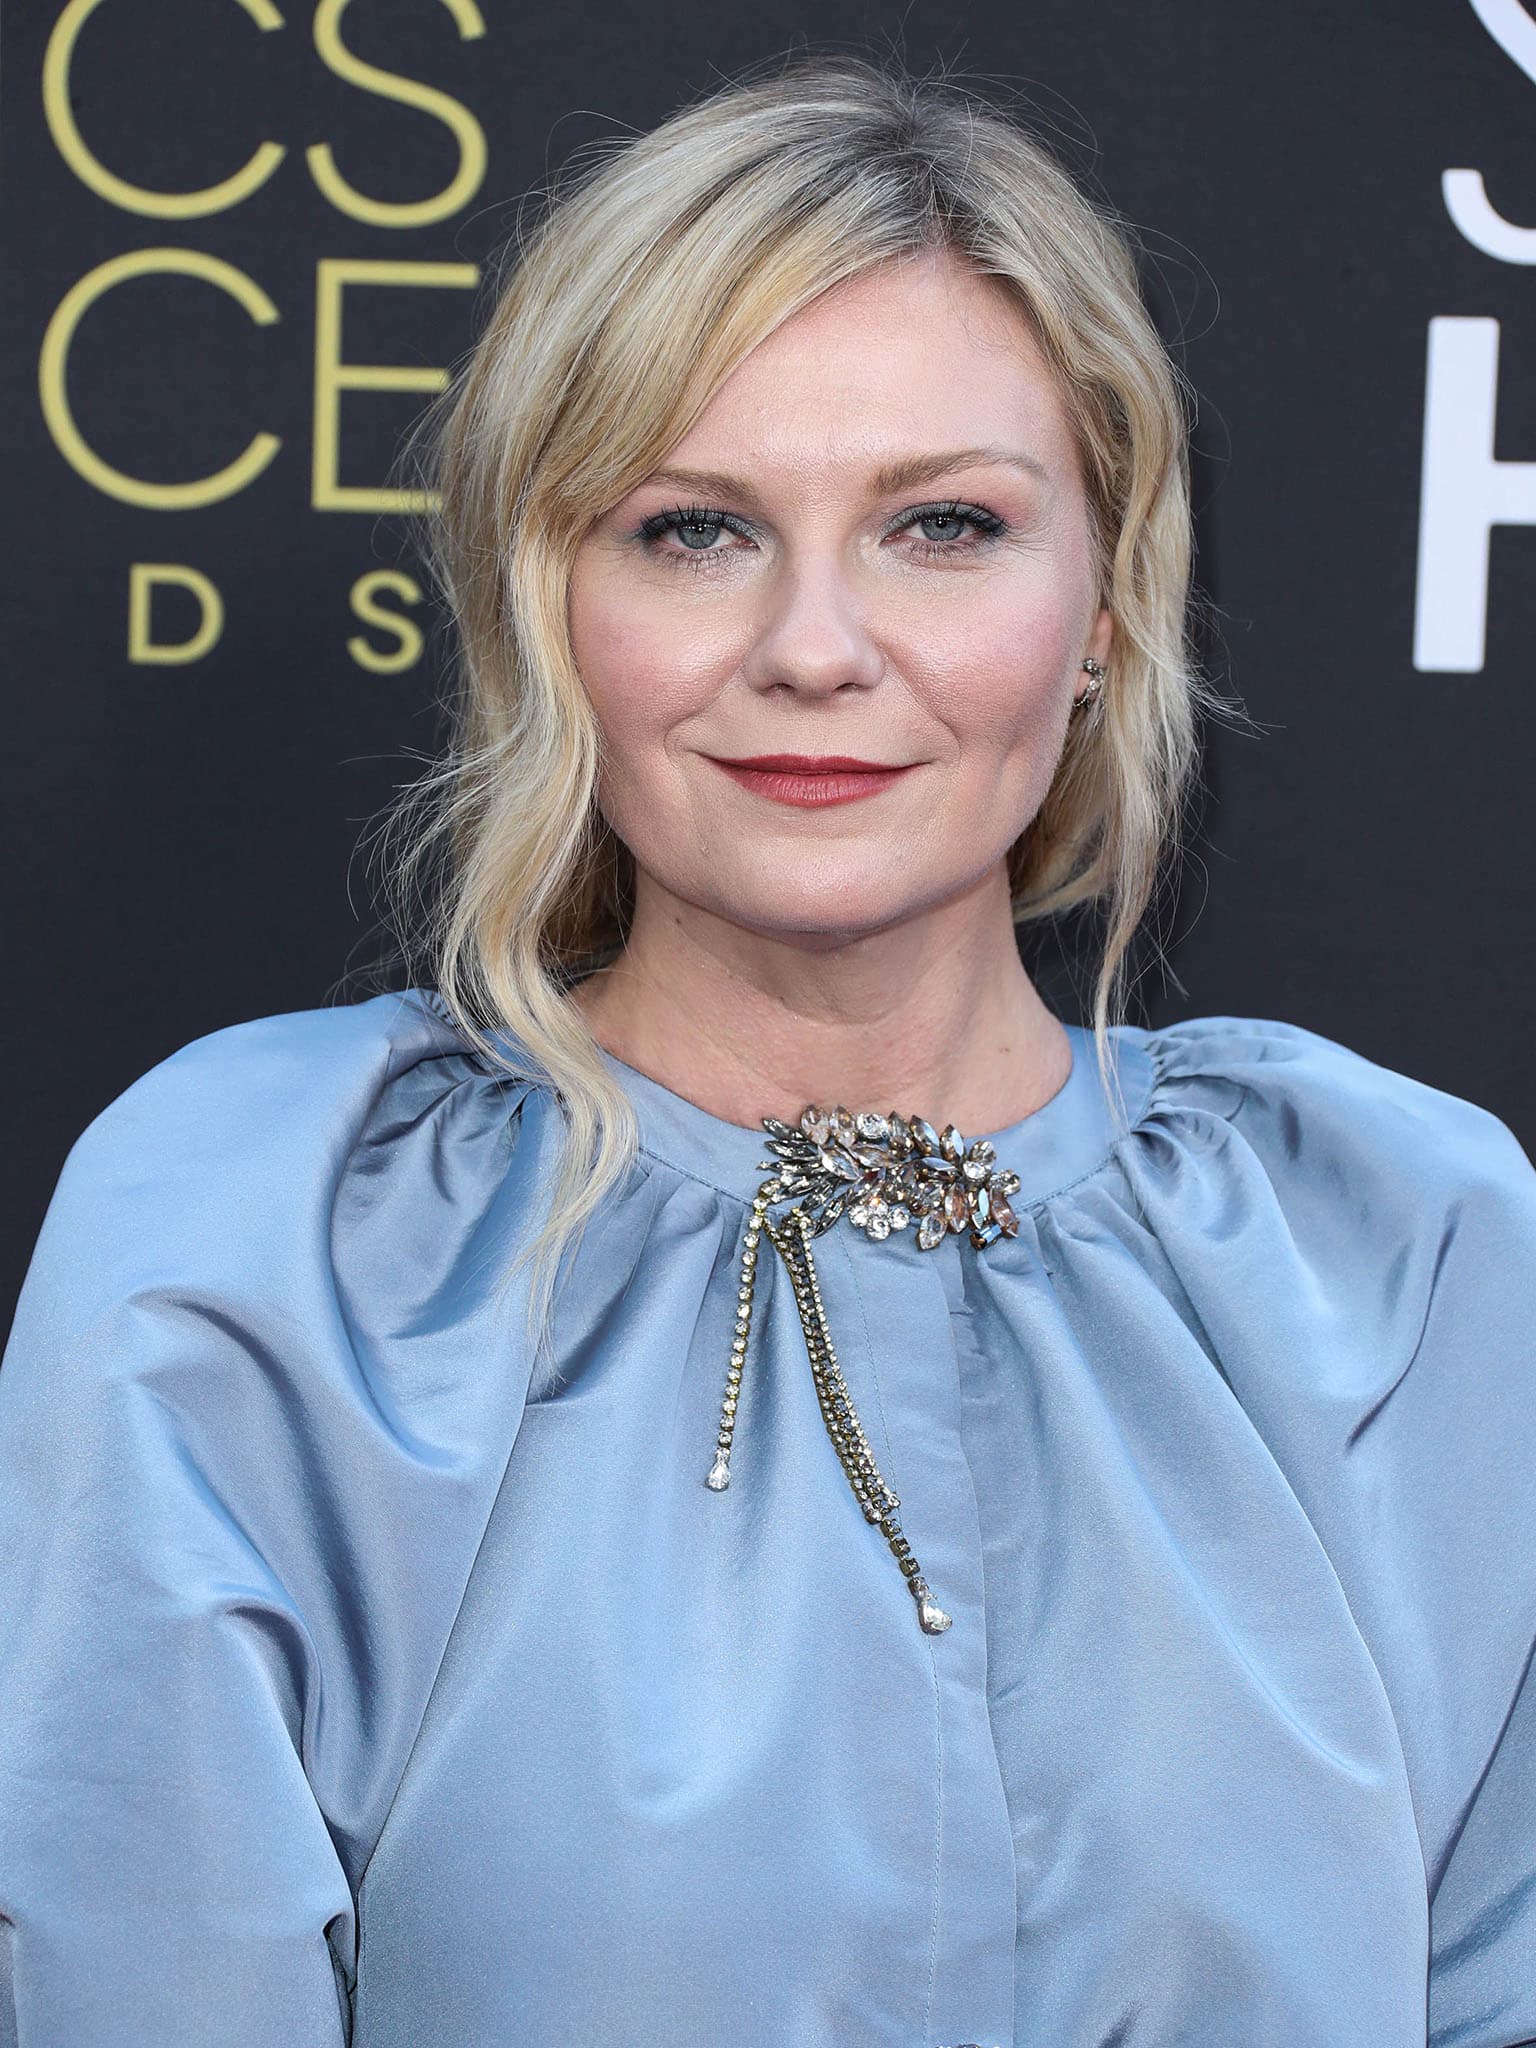 Kirsten Dunst coordinates her dress with her makeup with blue eyeshadow and red lipstick